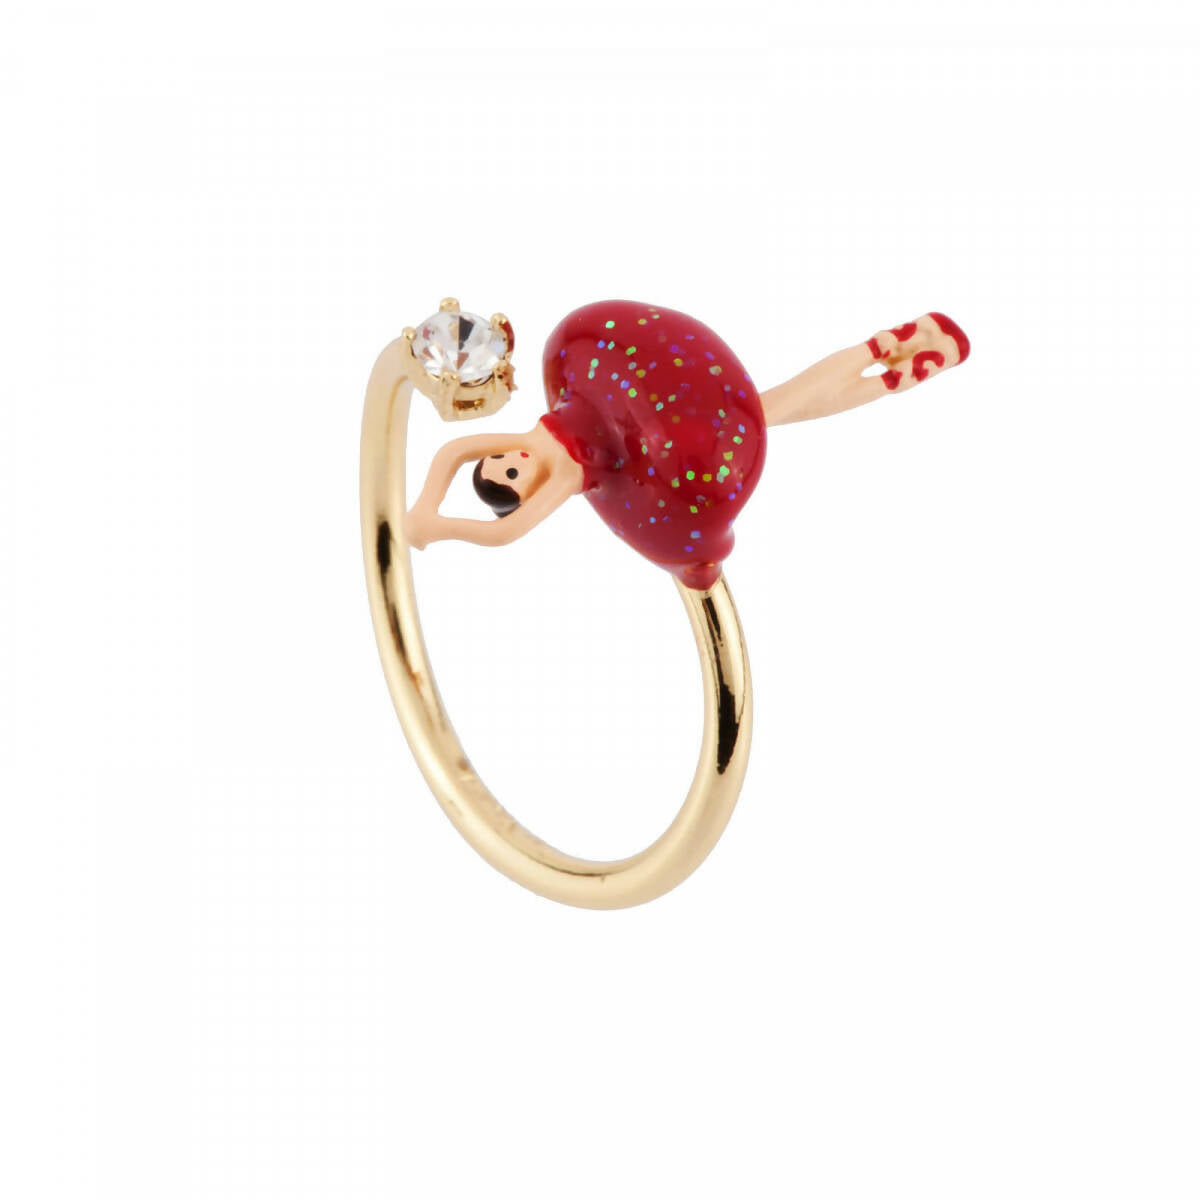 ADJUSTABLE RING WITH MINI BALLERINA IN A RED TUTU - Yooto